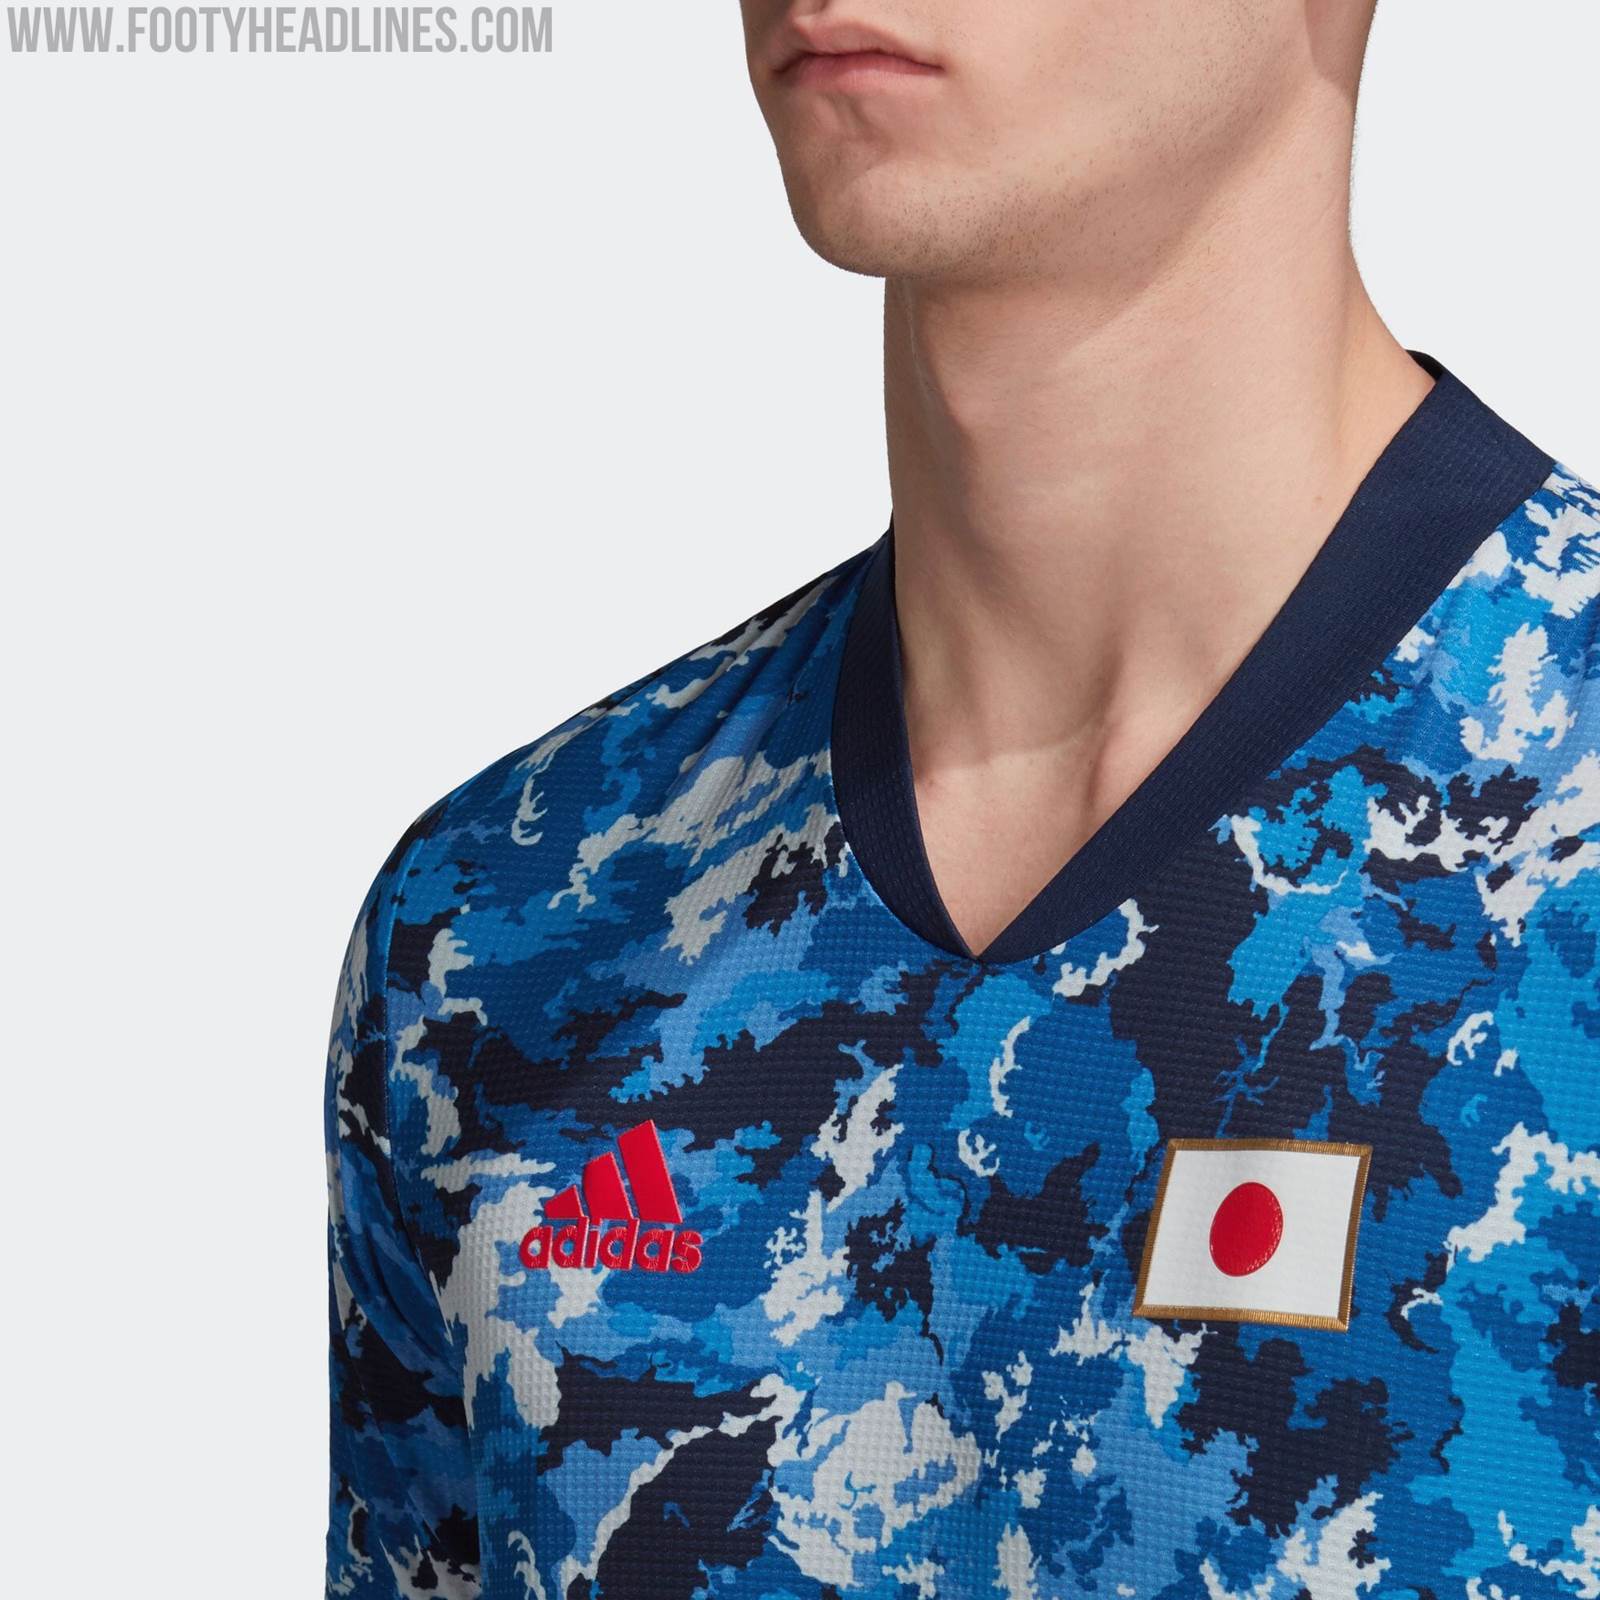 Japan's Blue-Camo 2020 adidas Home Kit is One of the Waviest Shirts Ever  Made